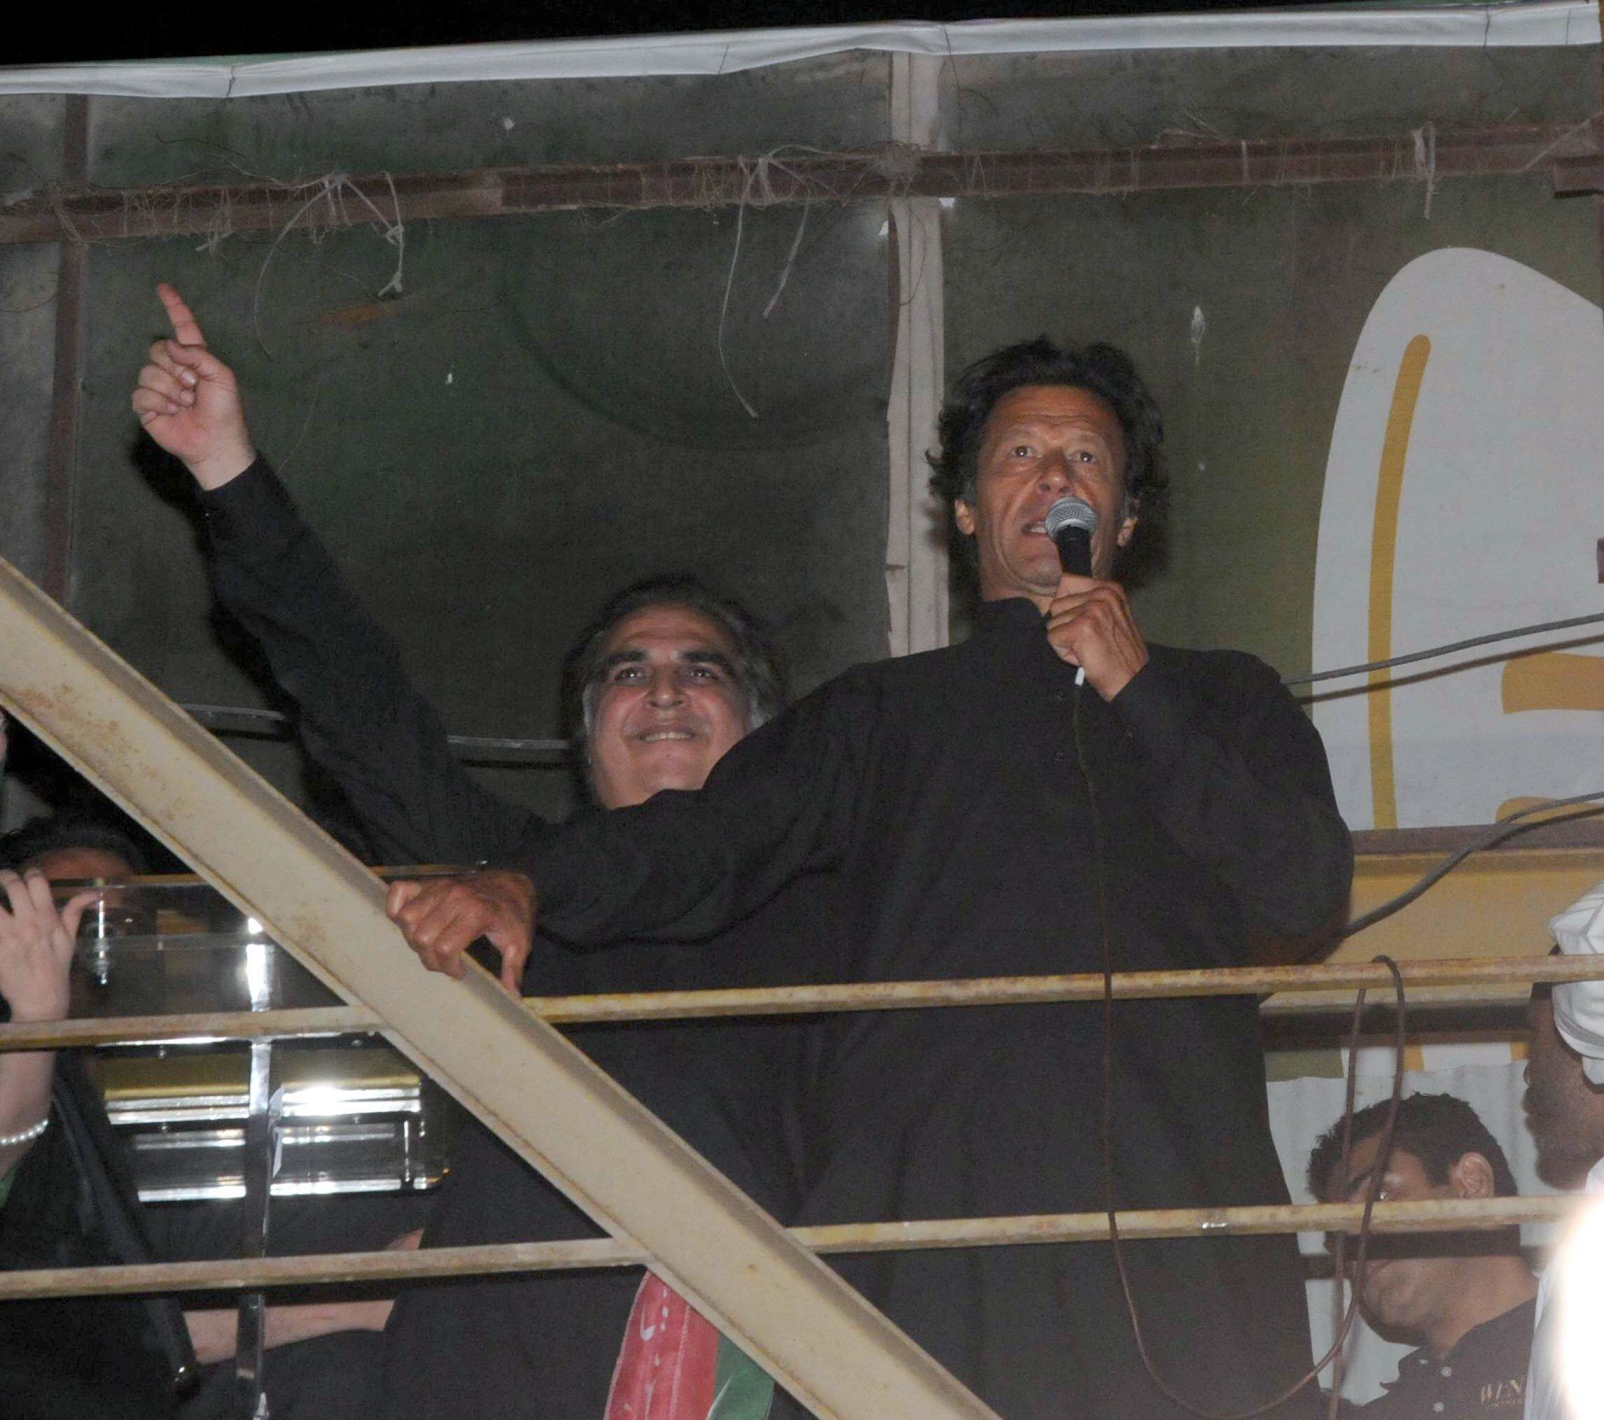 imran ismail stands behind pti chairman imran khan during party rally on sunday april 19 2014 photo mohammad noman express